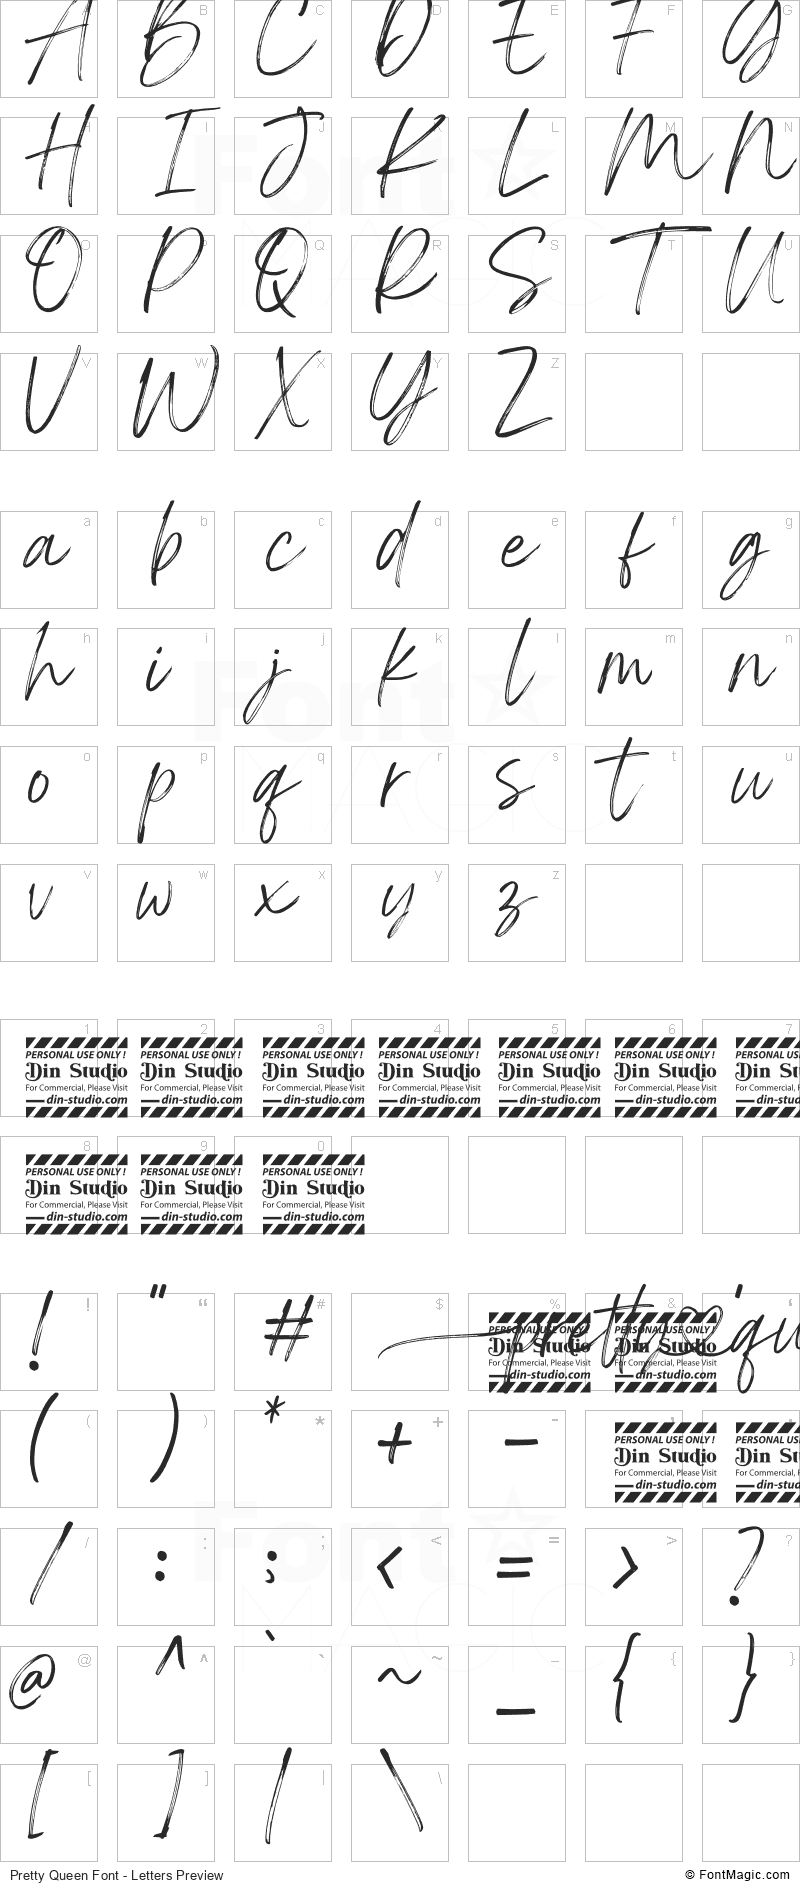 Pretty Queen Font - All Latters Preview Chart